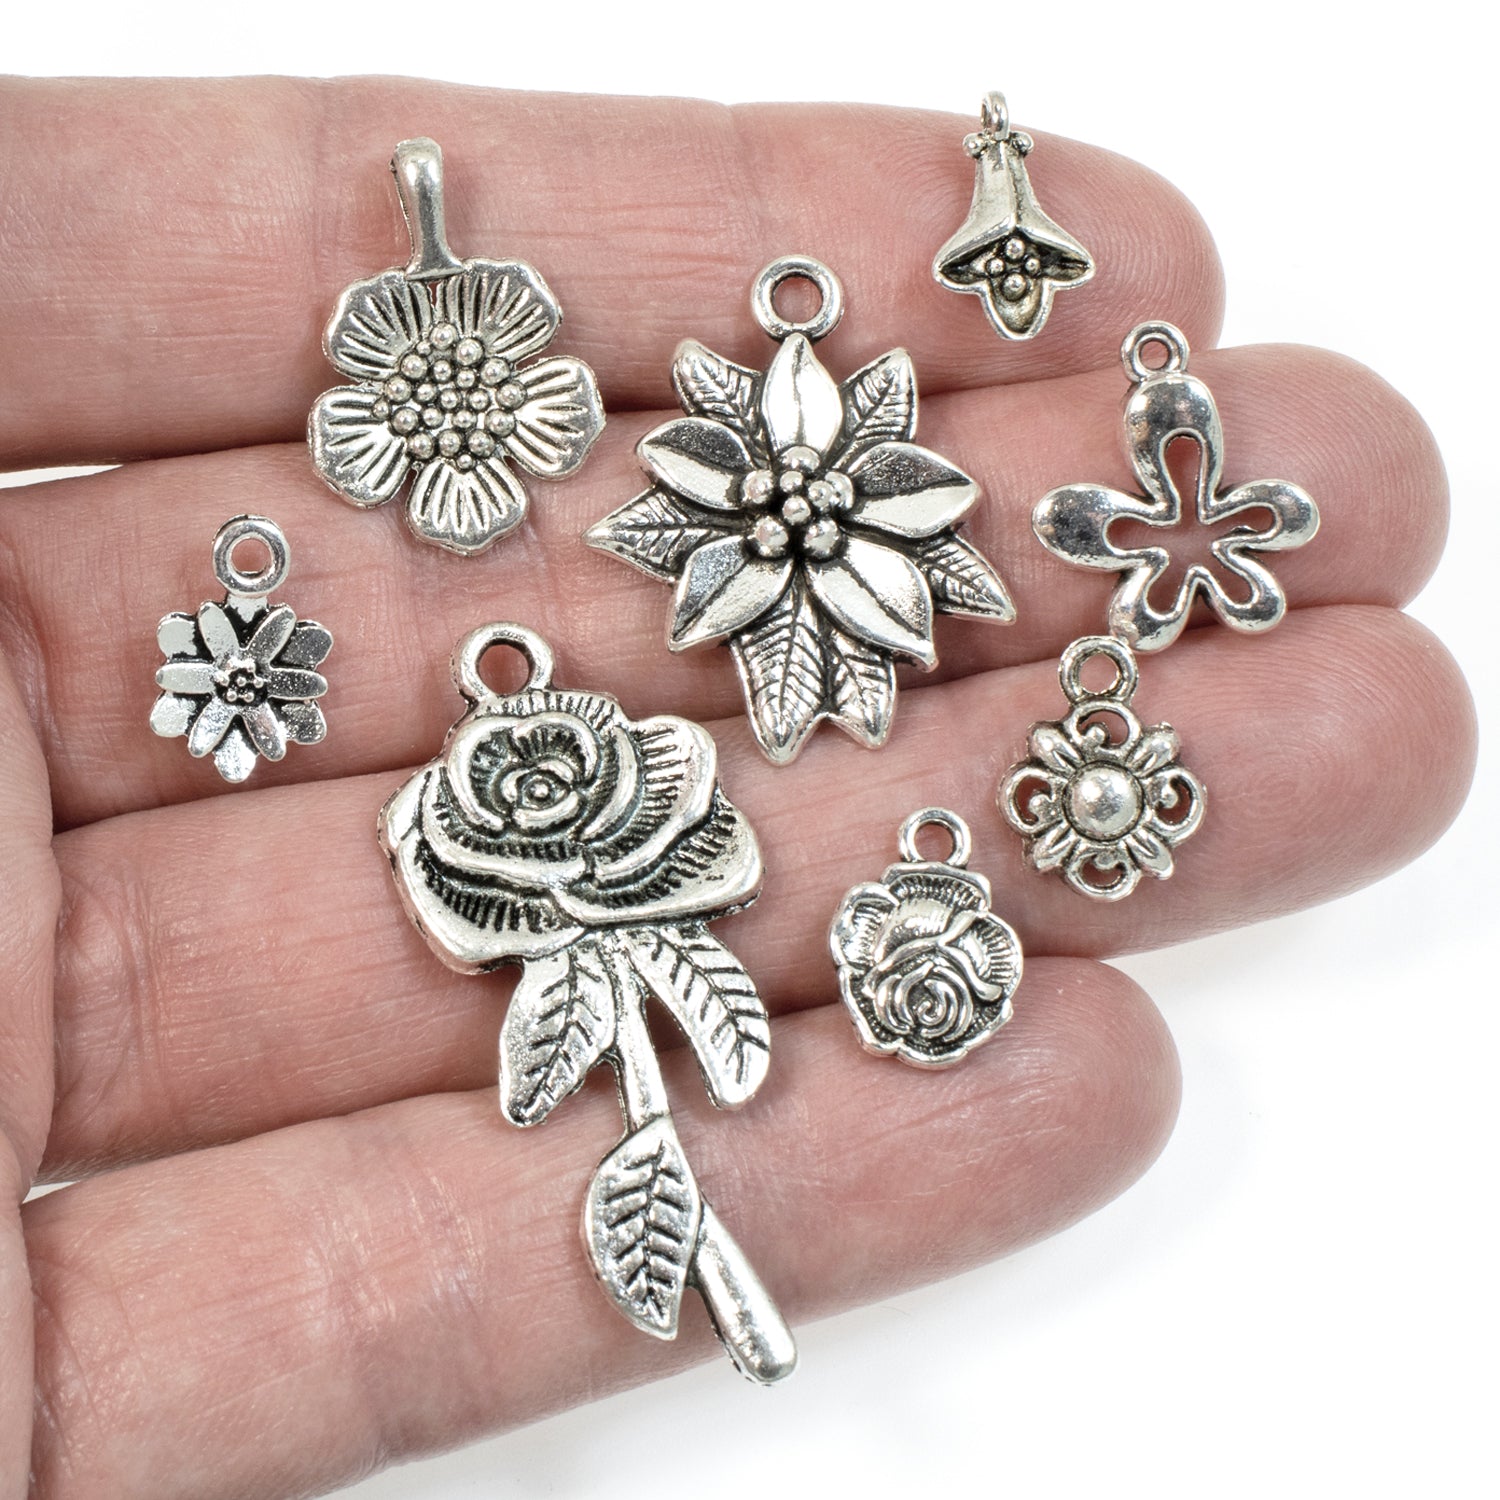 Wholesale Fairy Charms for Jewelry Making - TierraCast